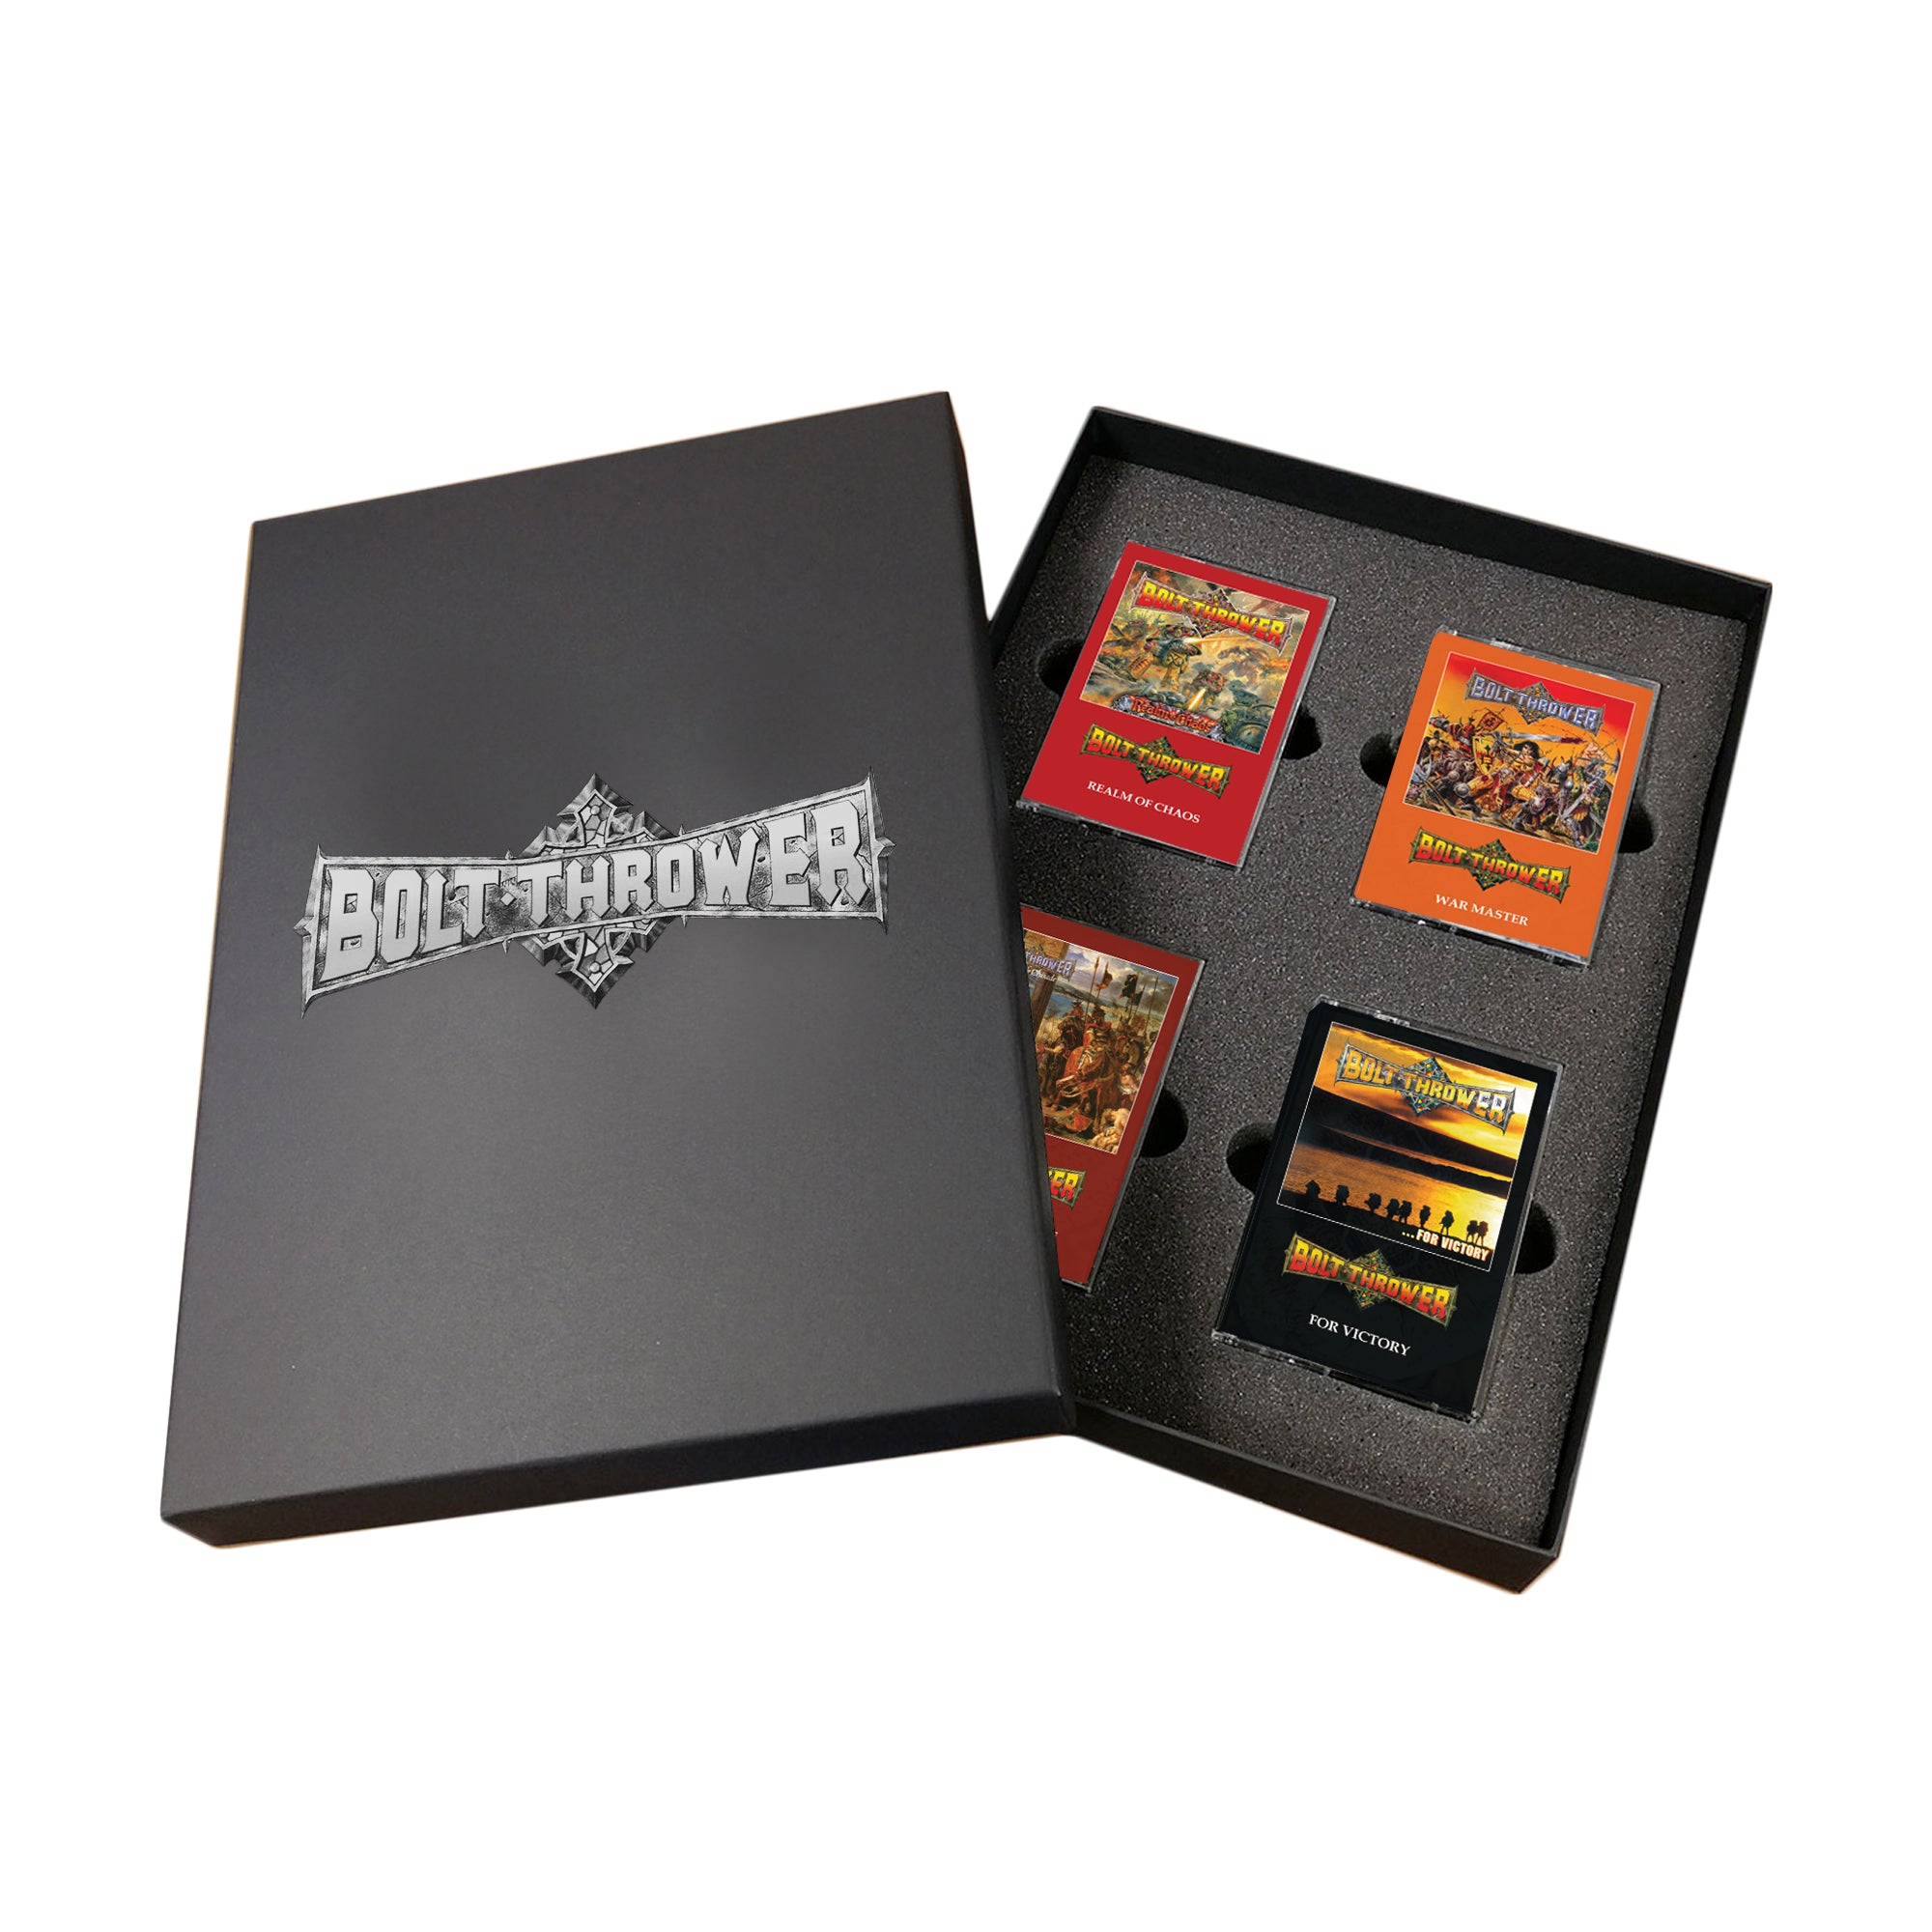 Bolt Thrower "Realm Of Chaos / War Master / The IVth Crusade / For Victory" 4 Cassette Tape Box Sets